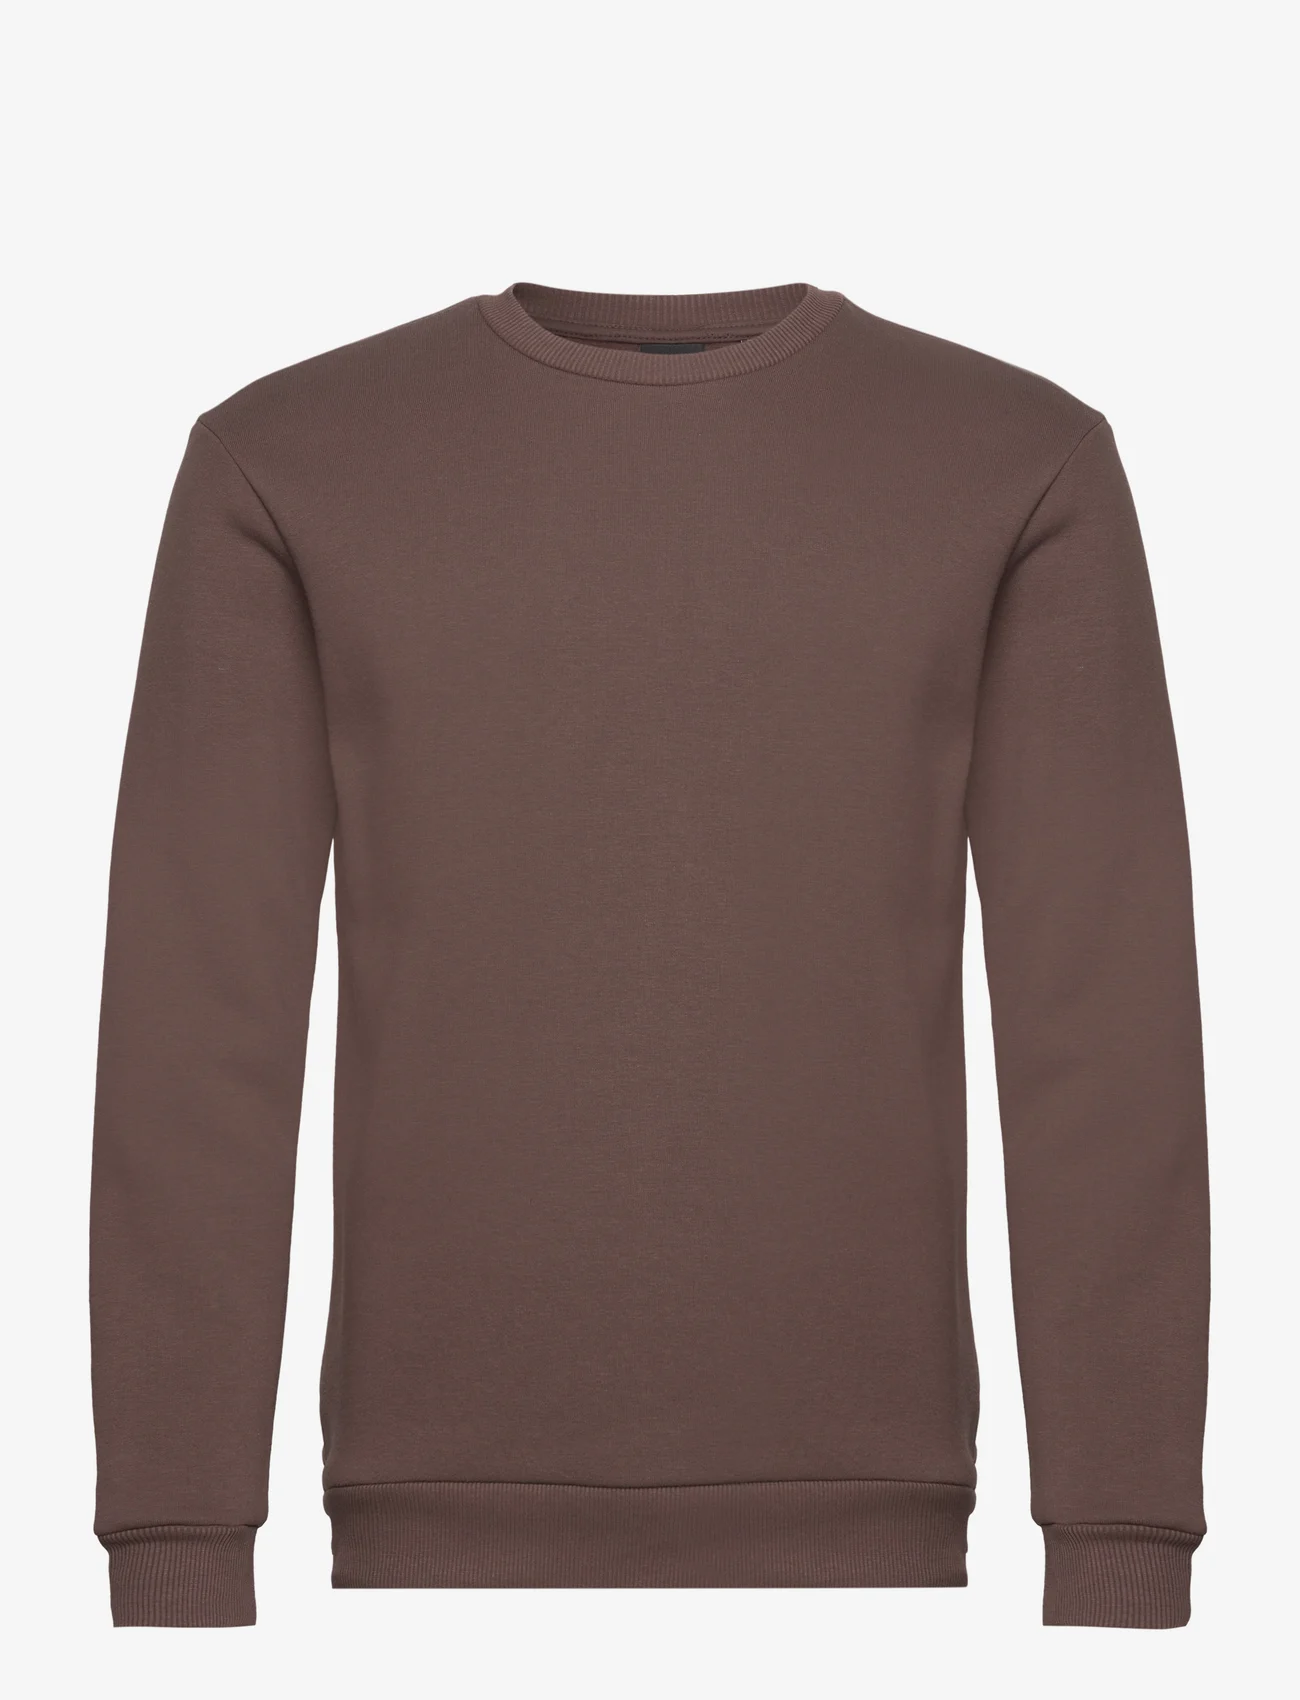 ONLY & SONS - ONSCERES CREW NECK NOOS - madalaimad hinnad - hot fudge - 0